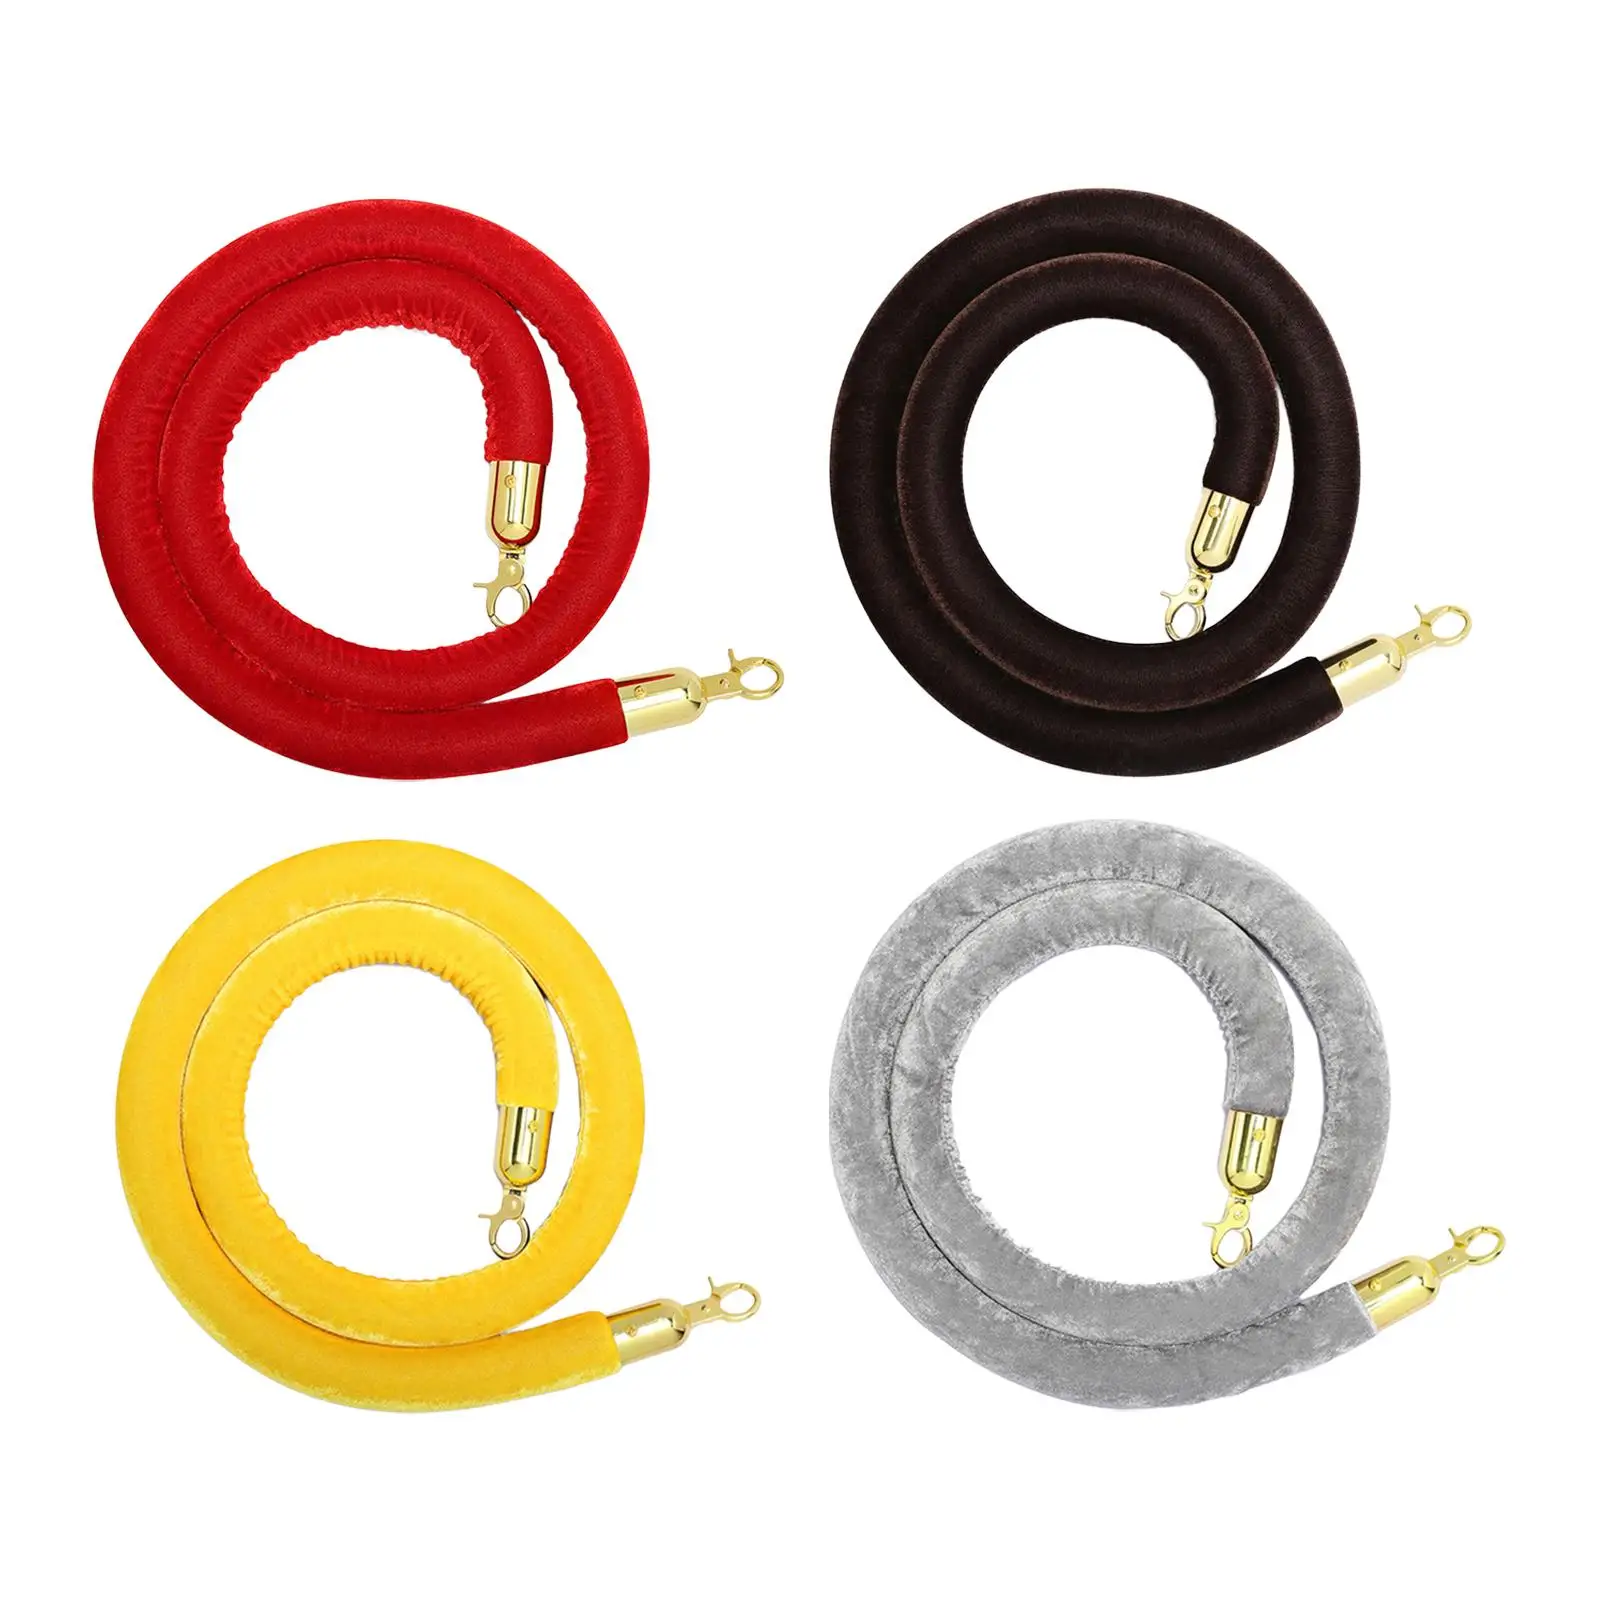 1x Queue Barrier Rope 4.9ft Playground Snap Queue Line Barrier Rope Welcome Flannel Rope for Grand Openings Queue Divider Hotel